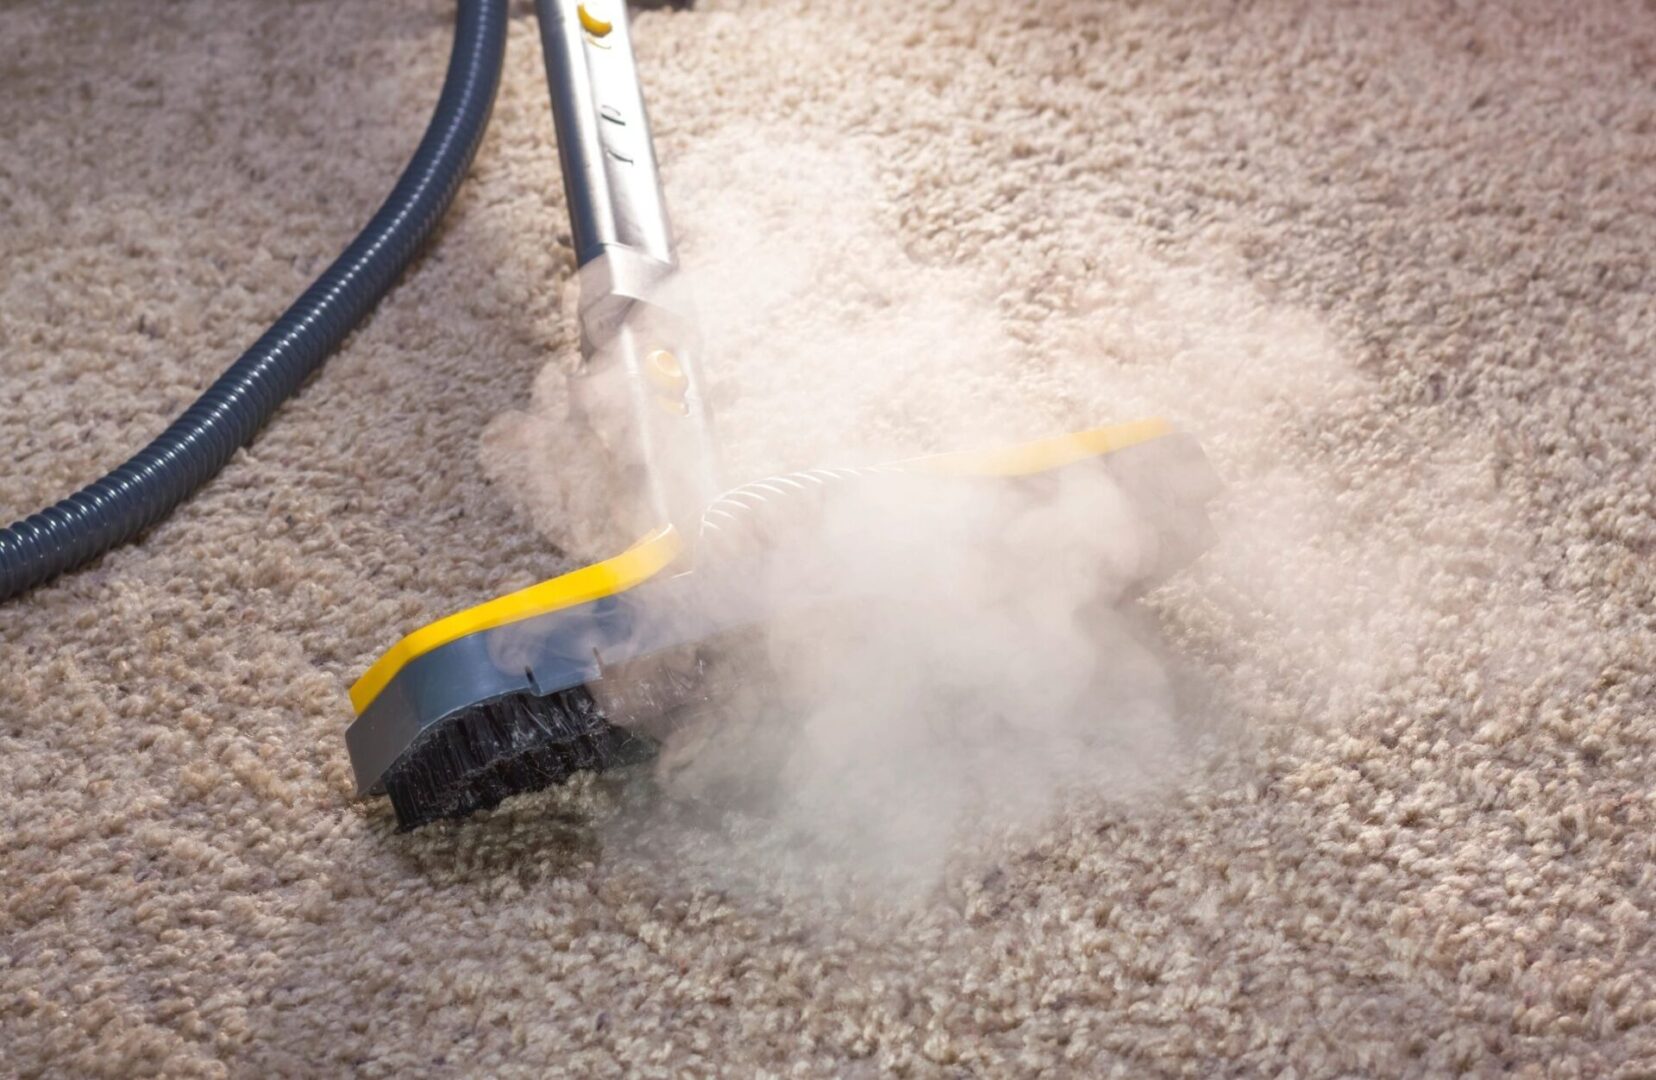 A steam cleaner is being used to clean the carpet.